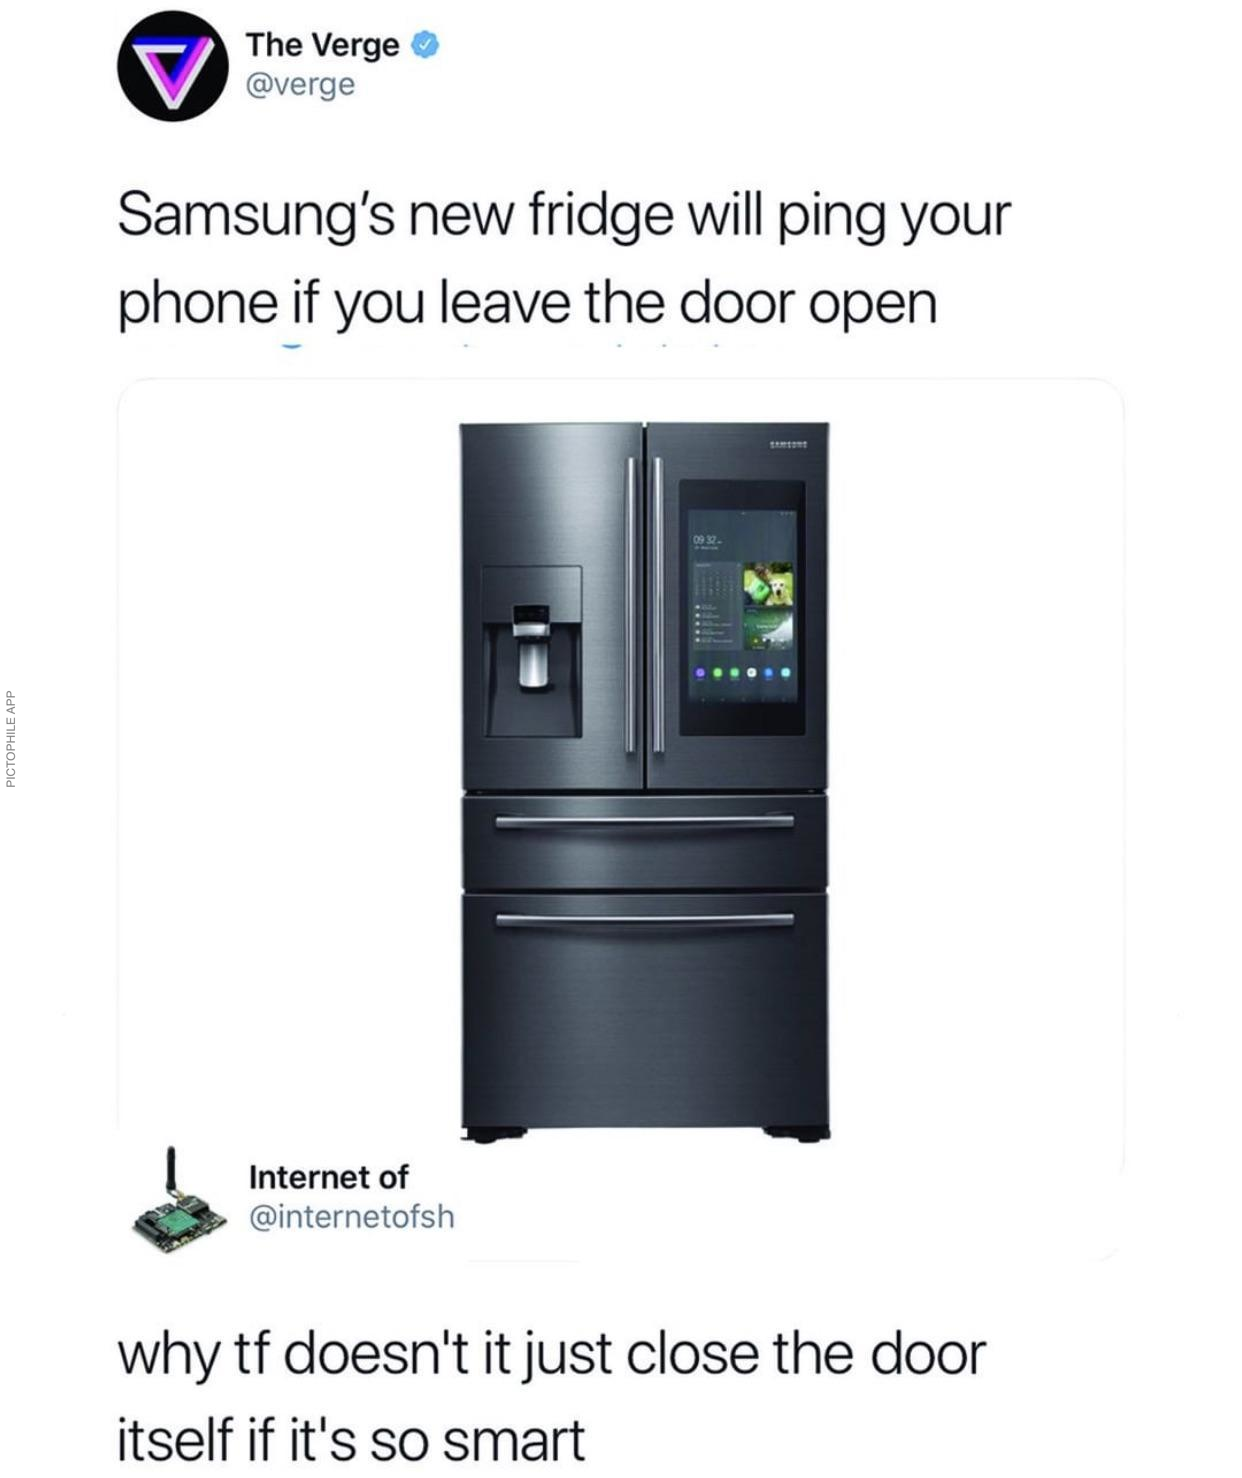 samsung smart fridge meme - The Verge verge Samsung's new fridge will ping your phone if you leave the door open Internet of internetofsh why tf doesn't it just close the door itself if it's so smart